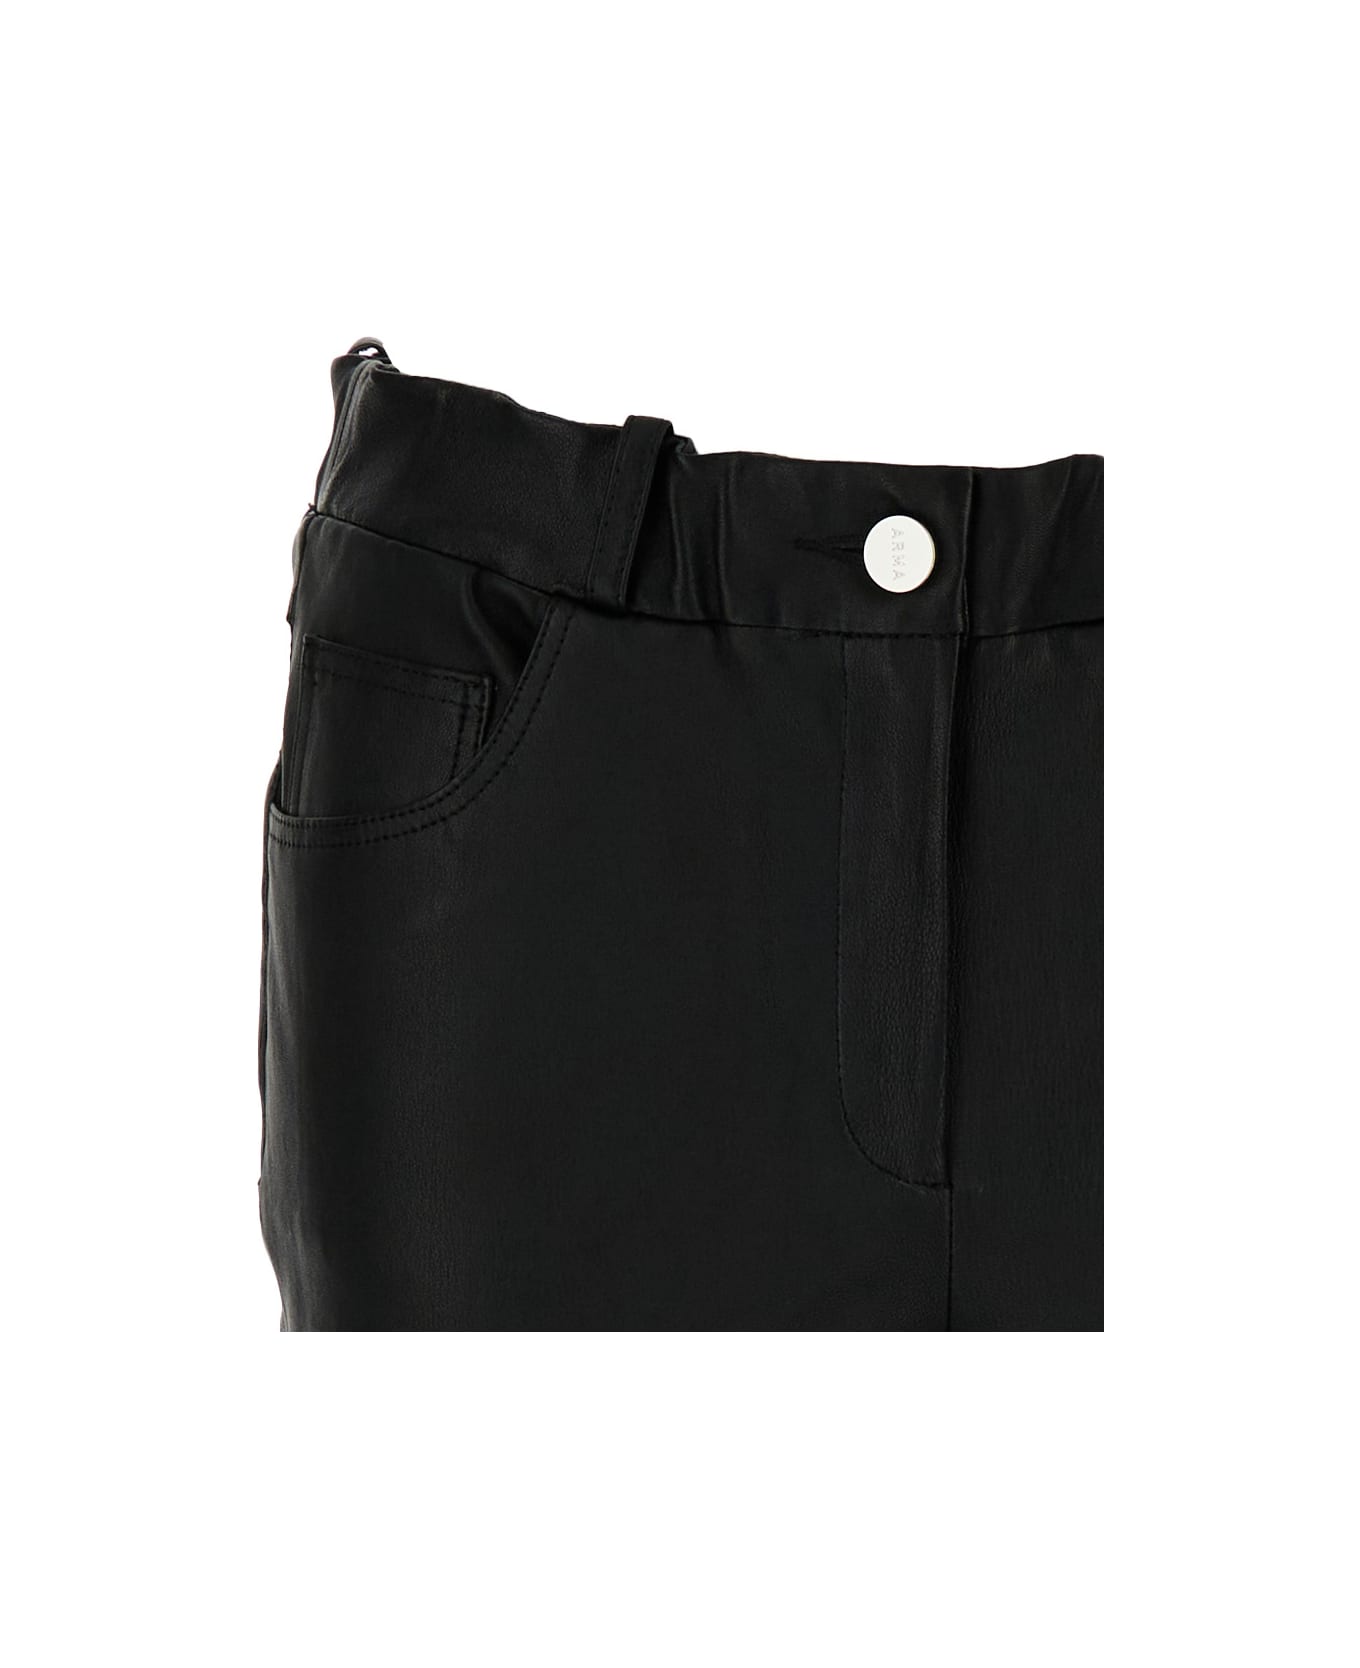 ARMA Black Wide Trousers In Leather Woman - Black